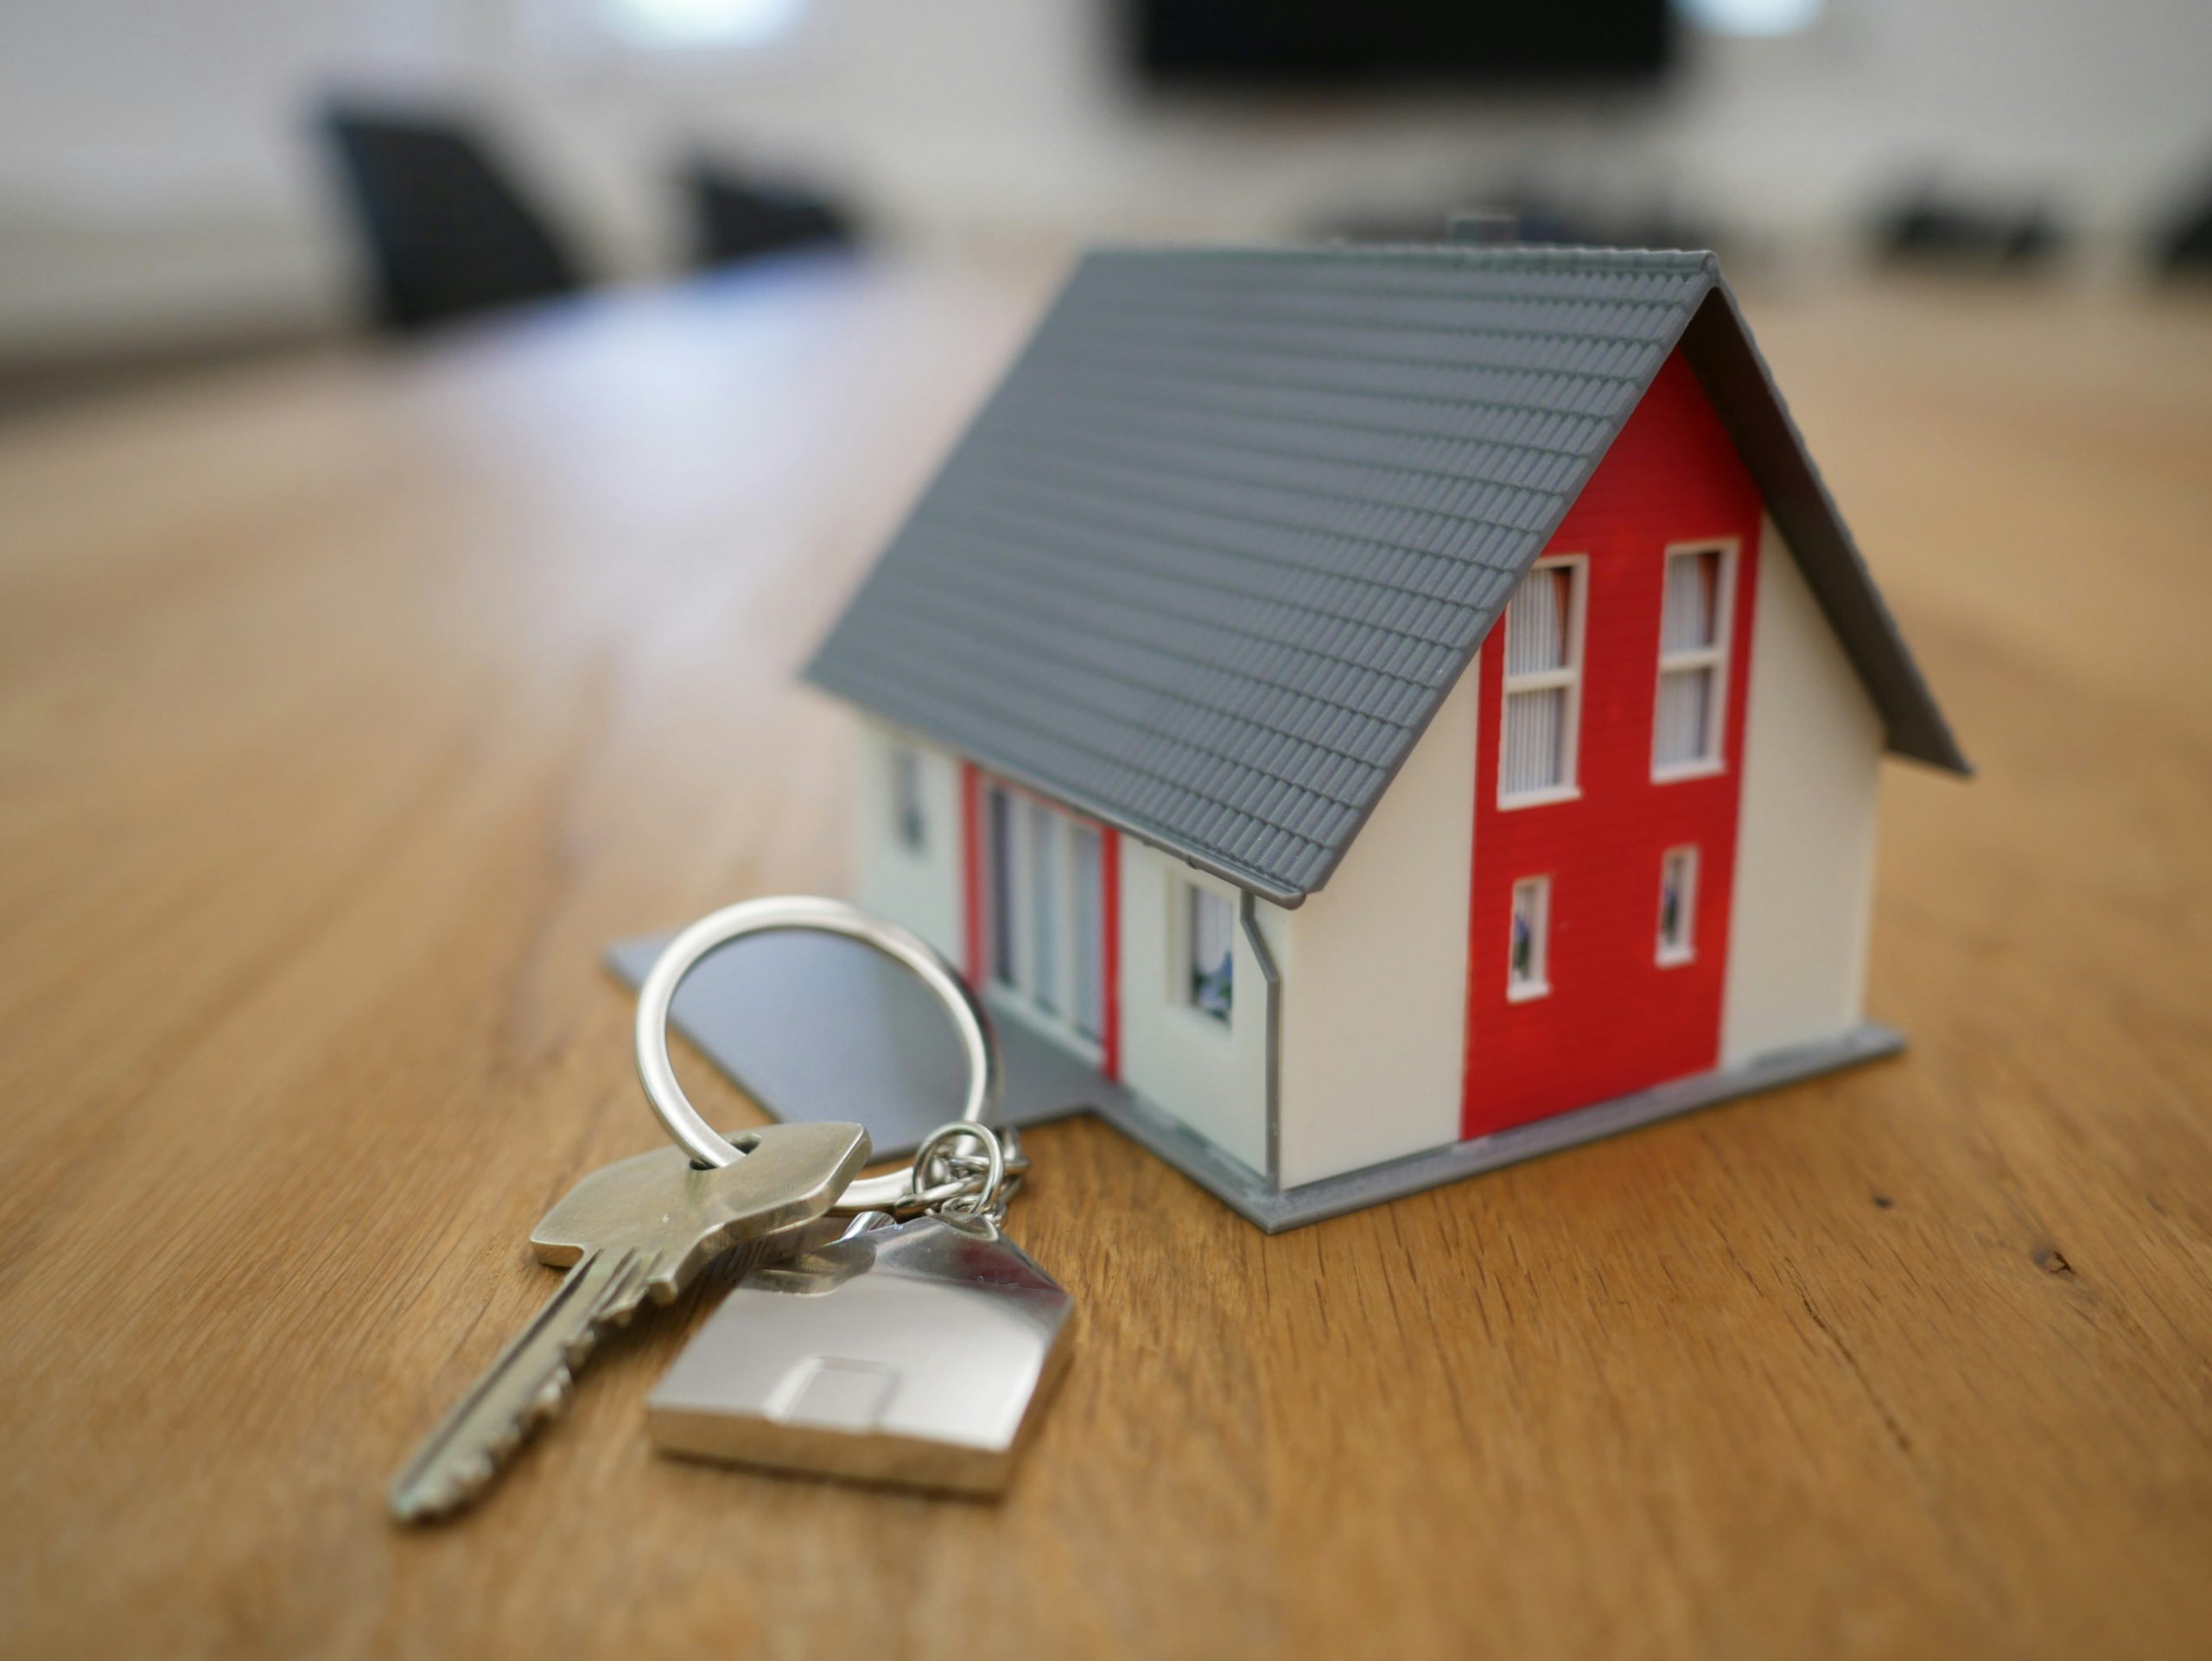 white and red wooden miniature house next to keychain to show purchase of new house/life transition